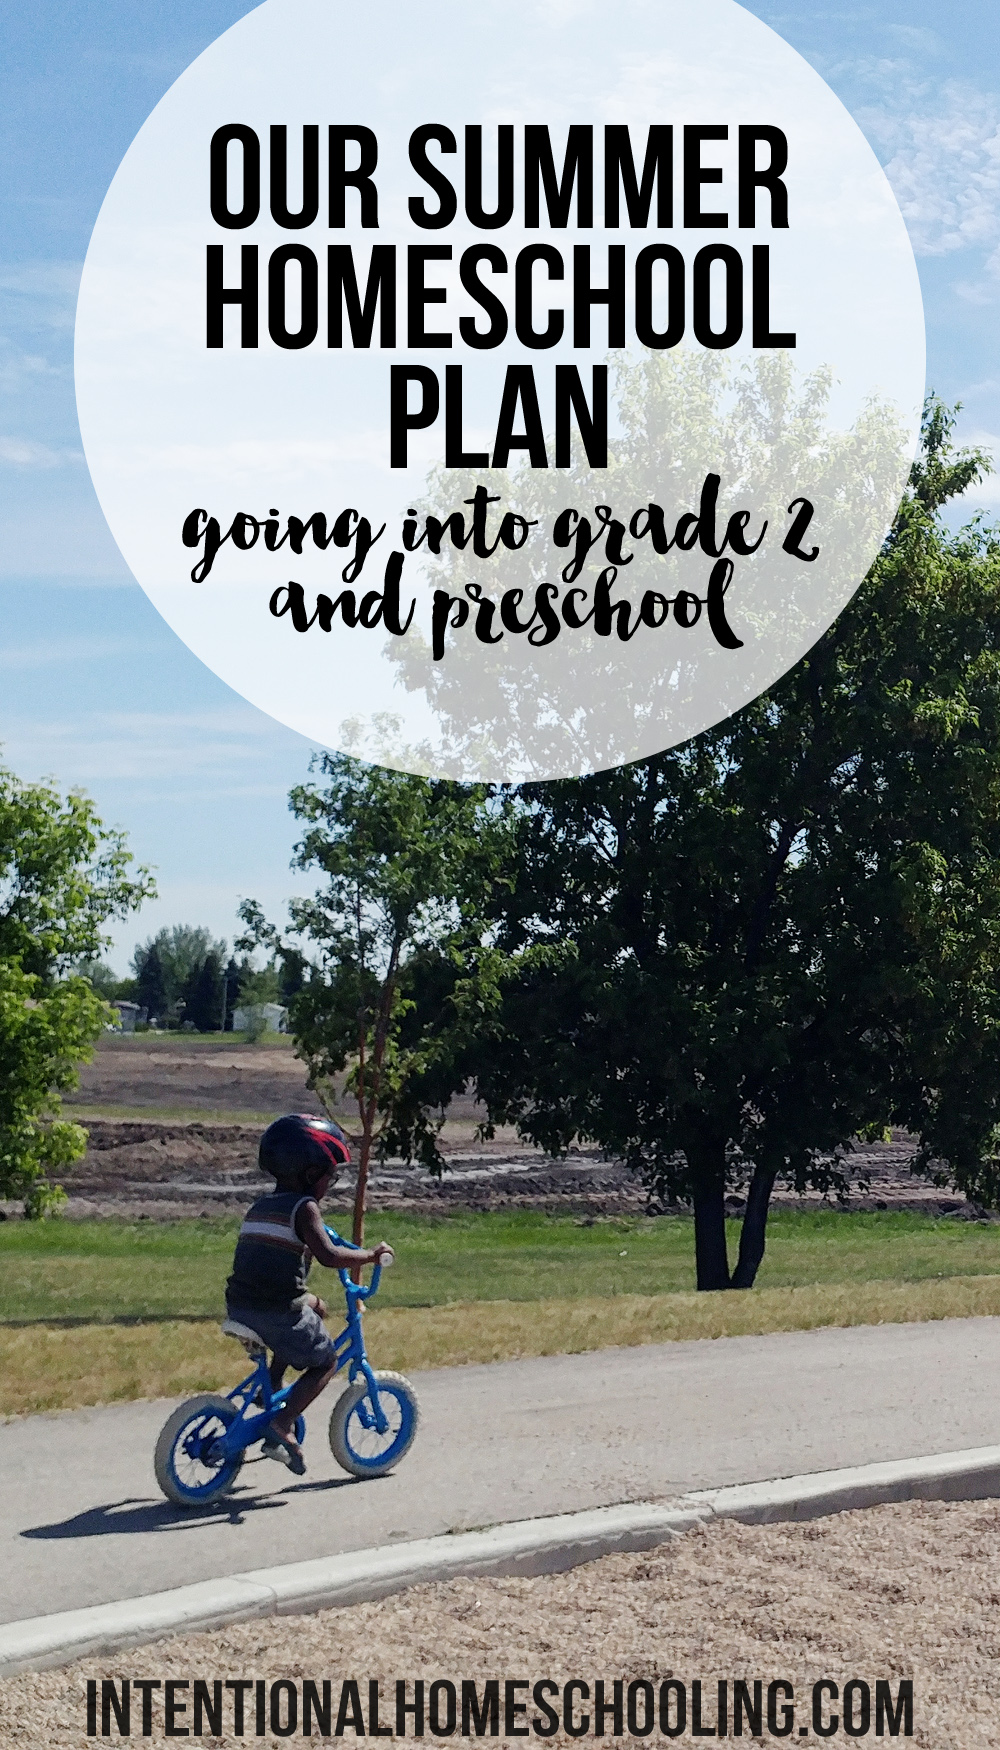 Our Homeschool Summer Plan - what we're planning for the summer for grade 2 and preschool